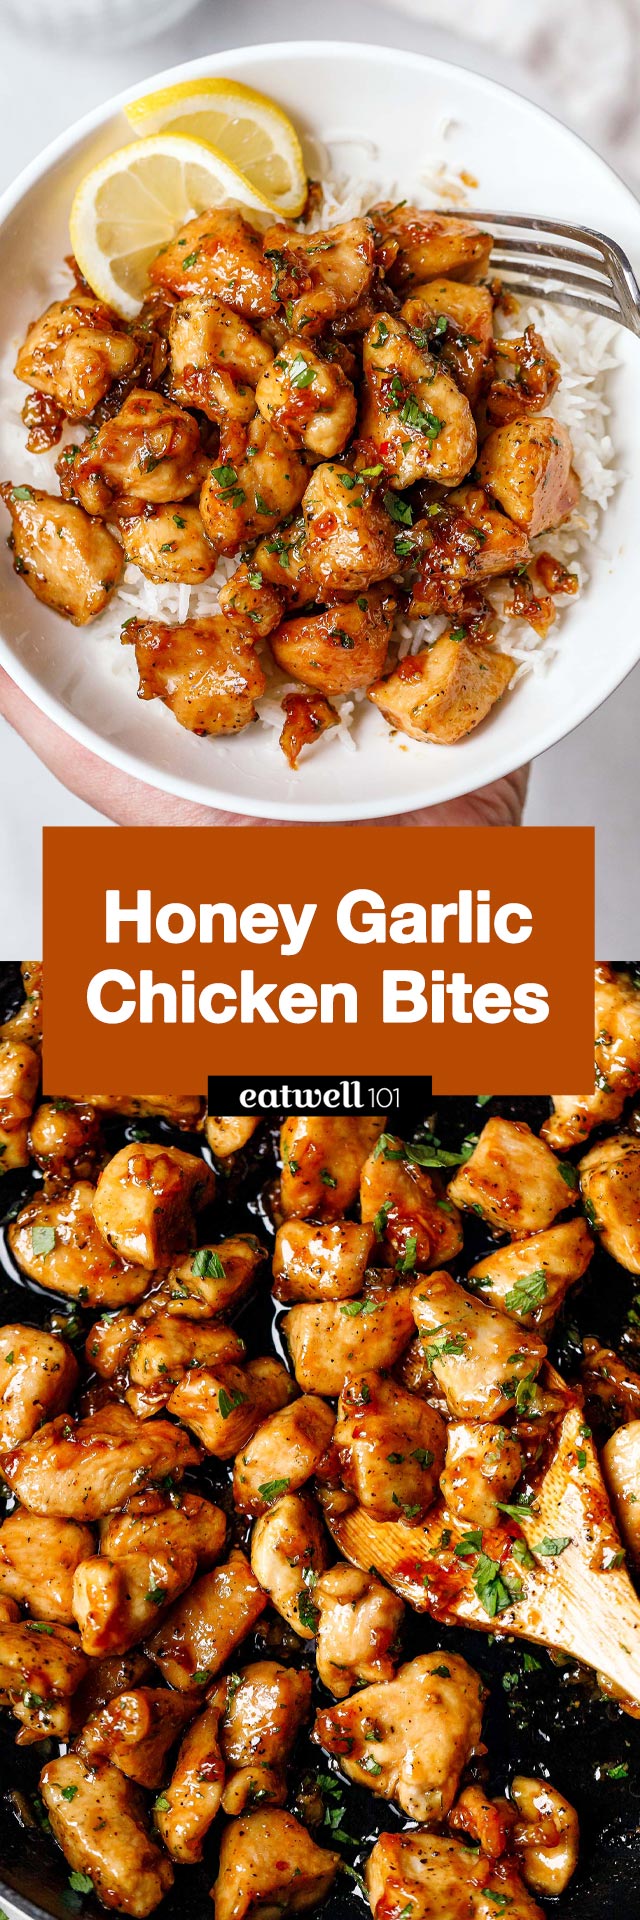 Honey garlic chicken bites - #chicken #honey #garlic #recipe #eatwell101 - The easiest dinner to throw together! Make it all in one skillet and let the flavors blow your mind!